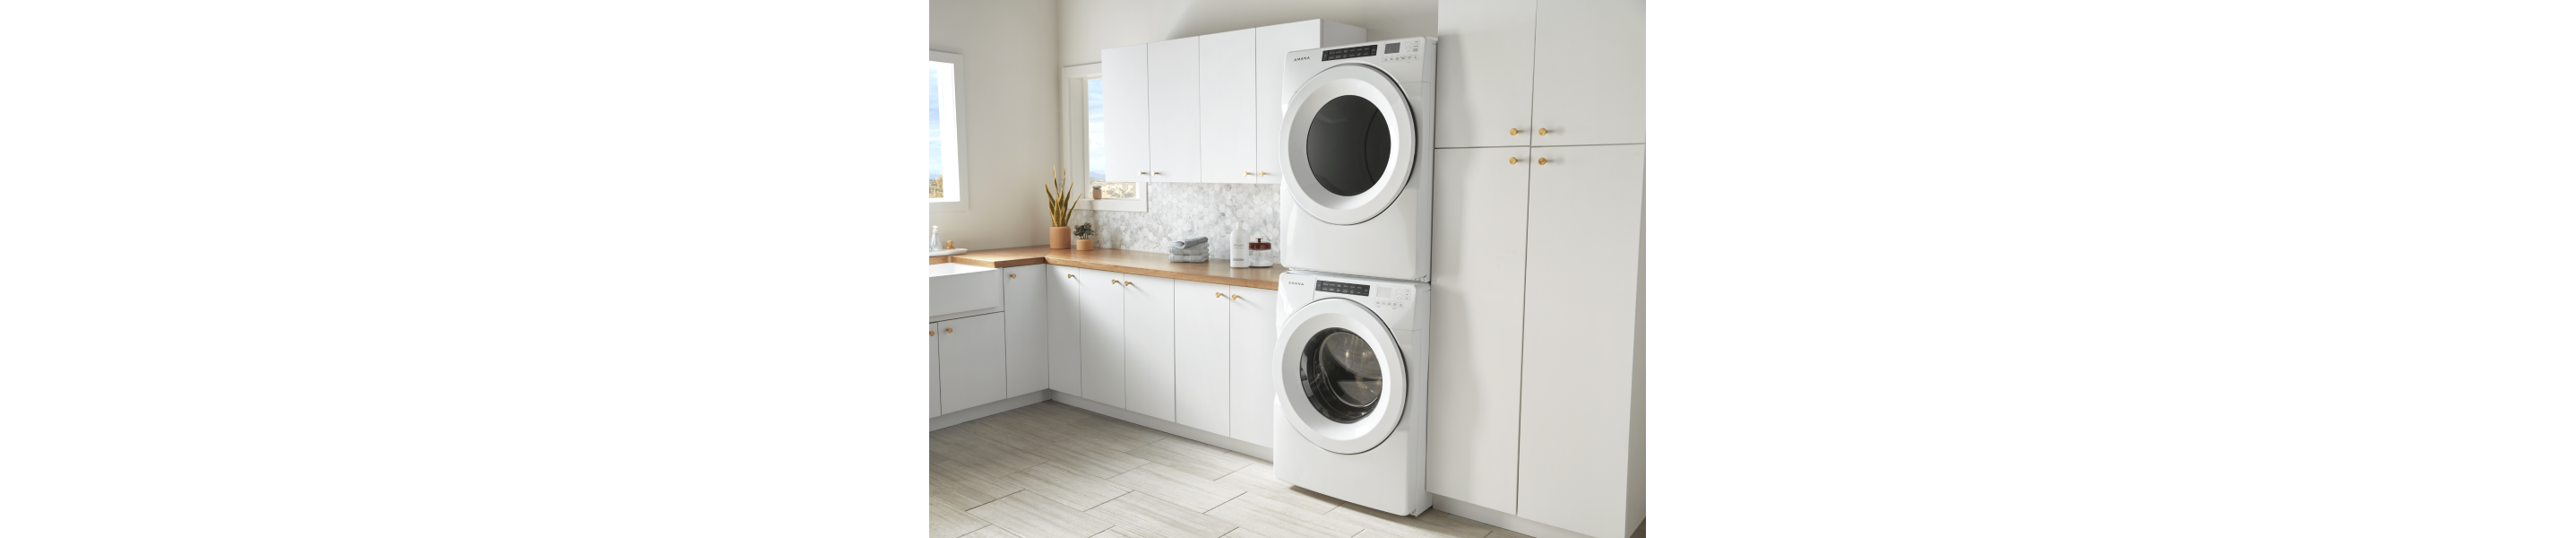 Choosing a Washer and Dryer Set on a Budget | Amana